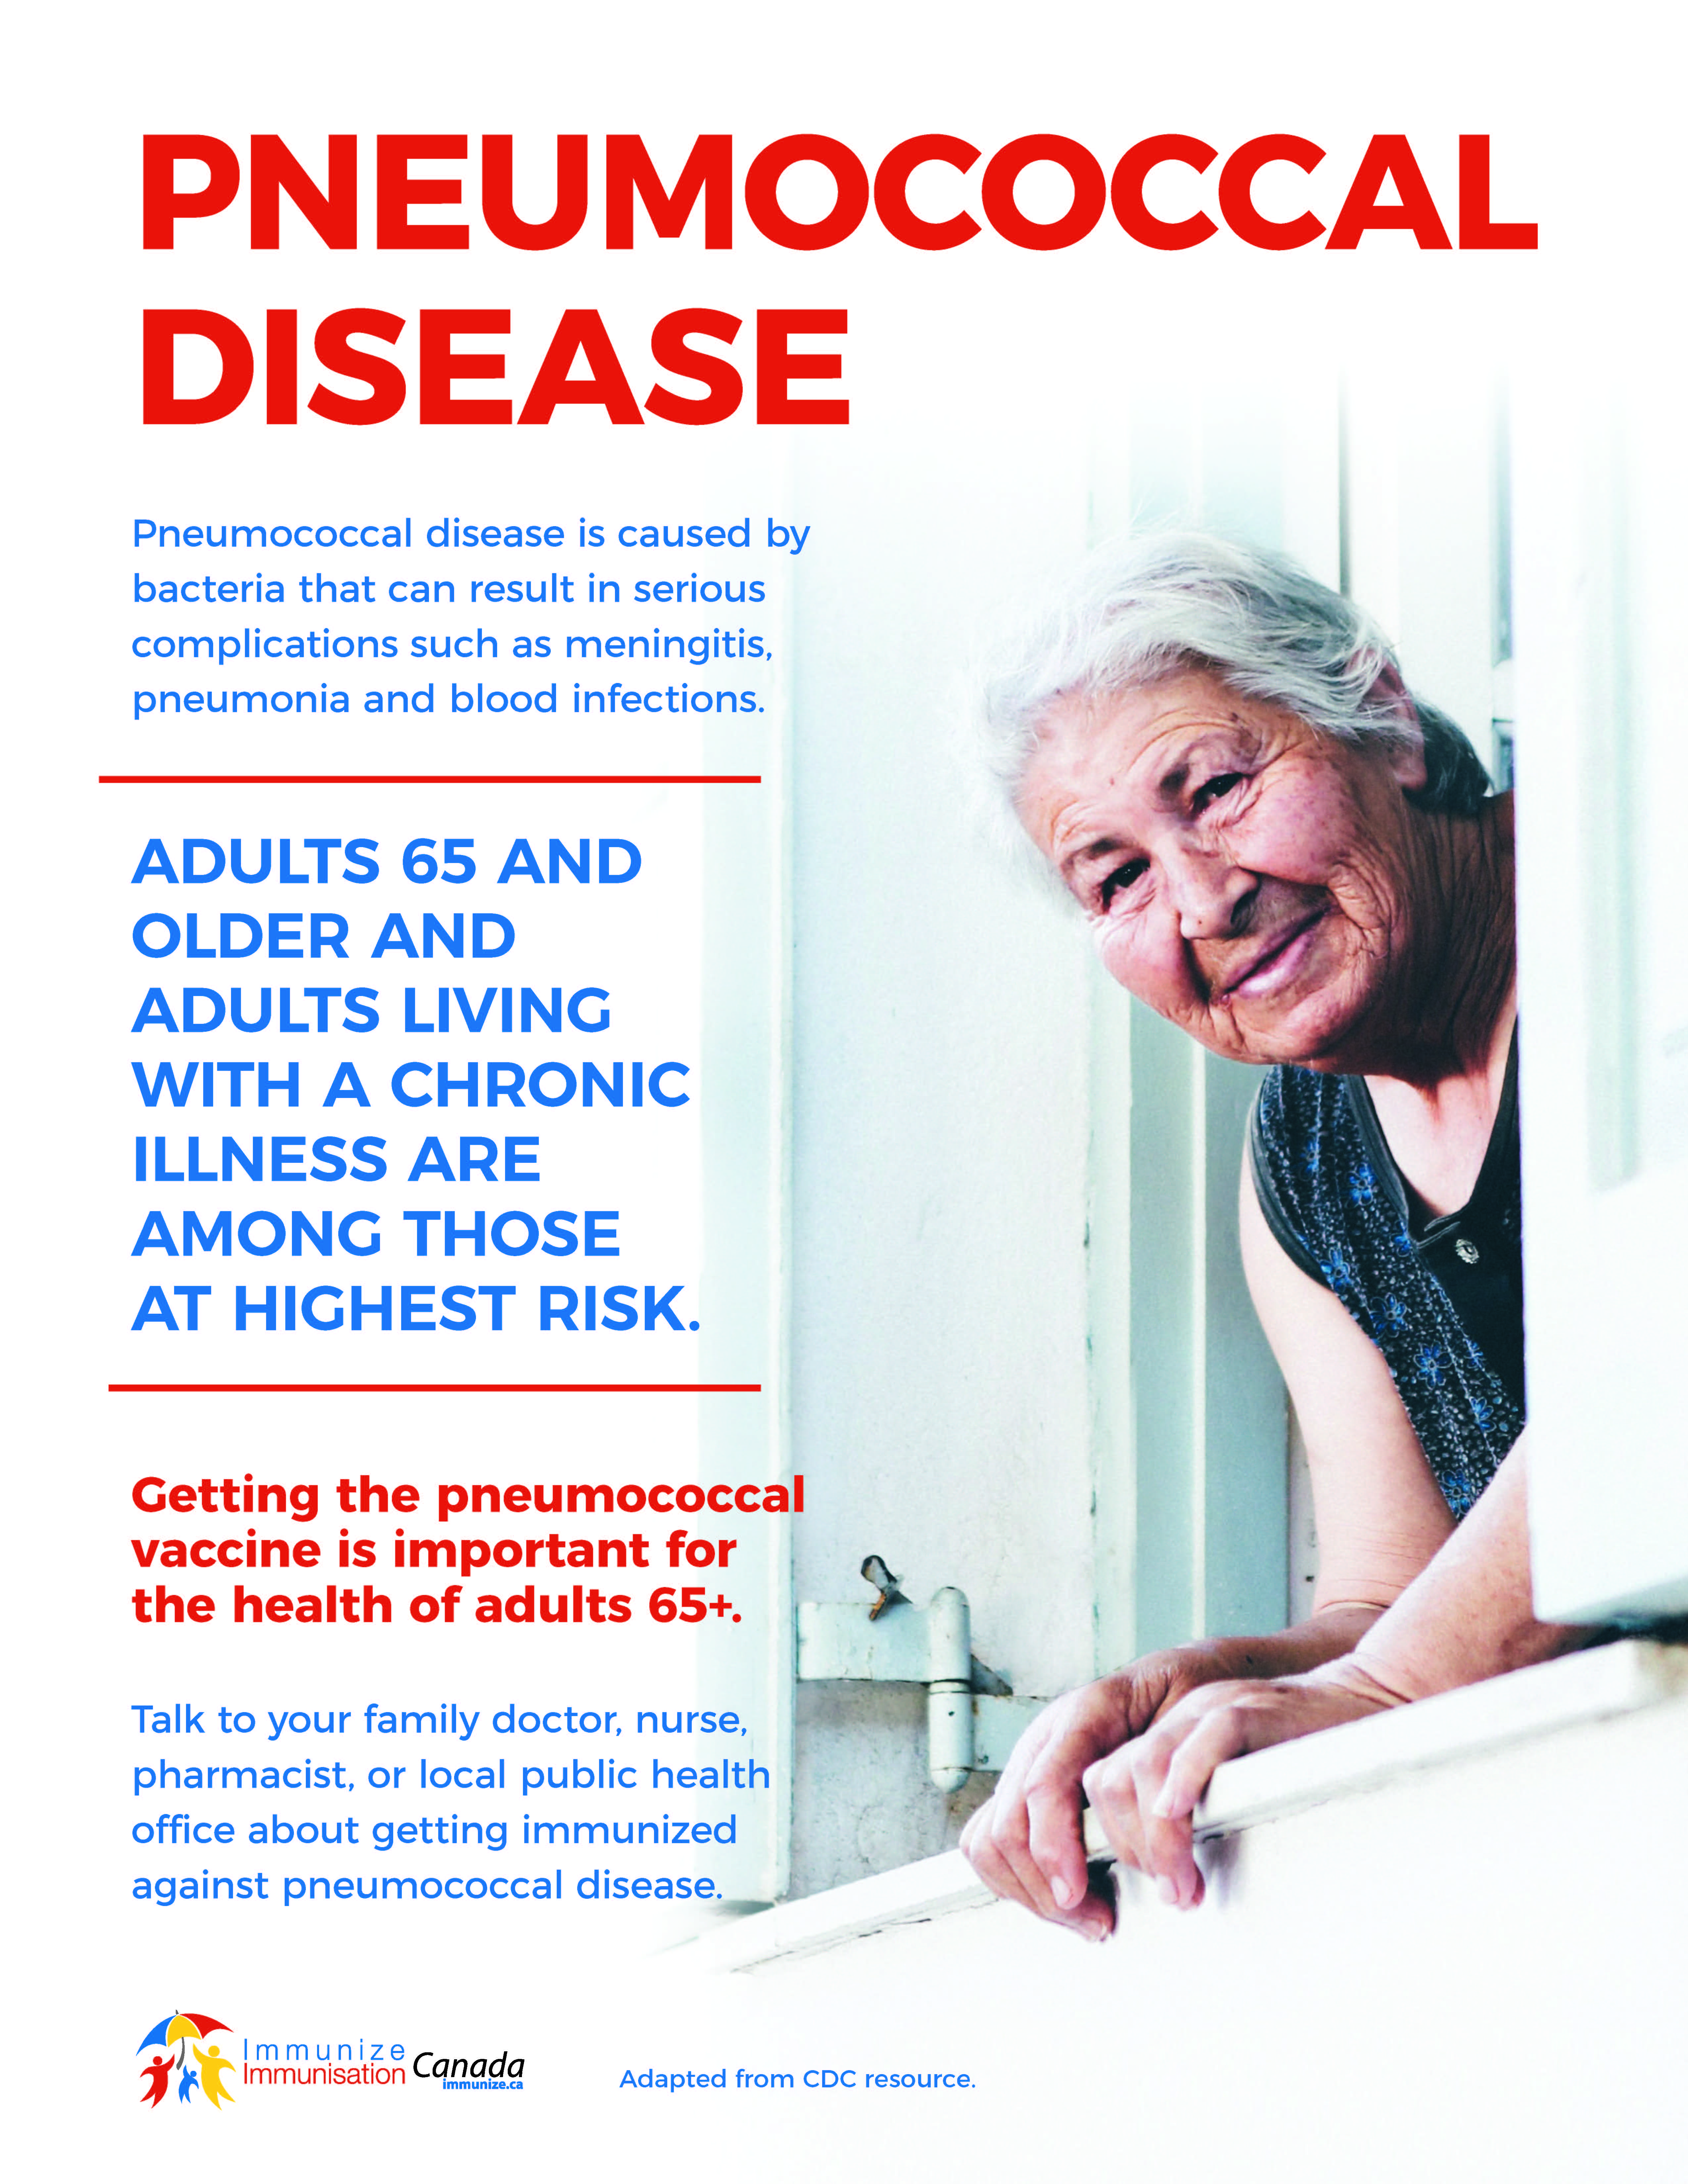 Pneumococcal disease: Adults 65+ and people living with a chronic illness